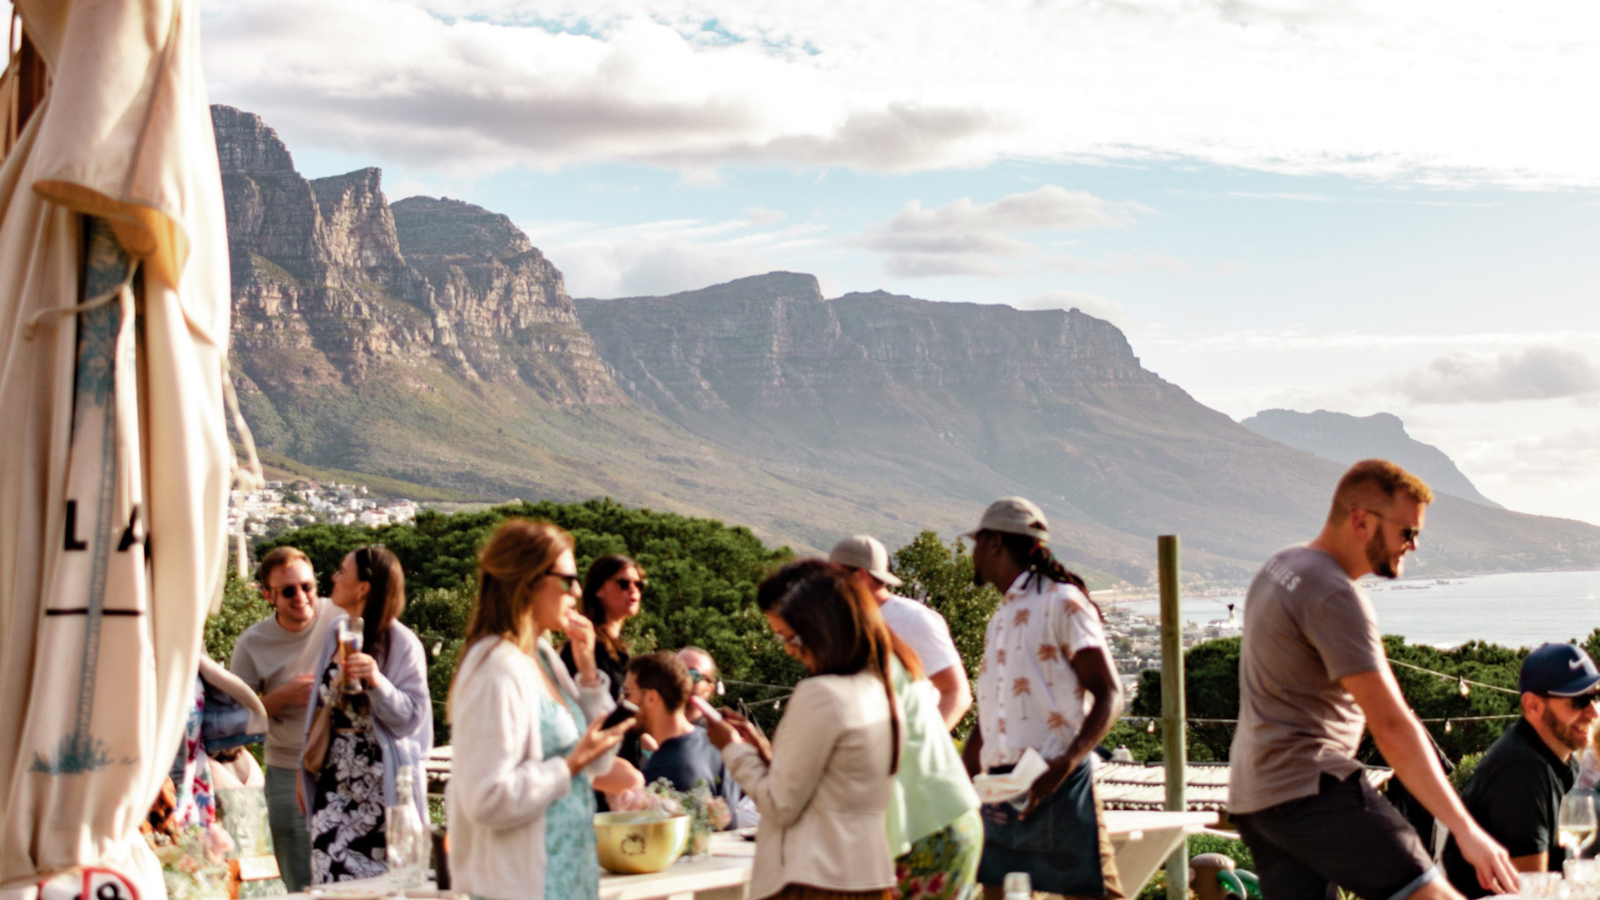 Group of people socializing with Table Mountain in the background, Cape Town.